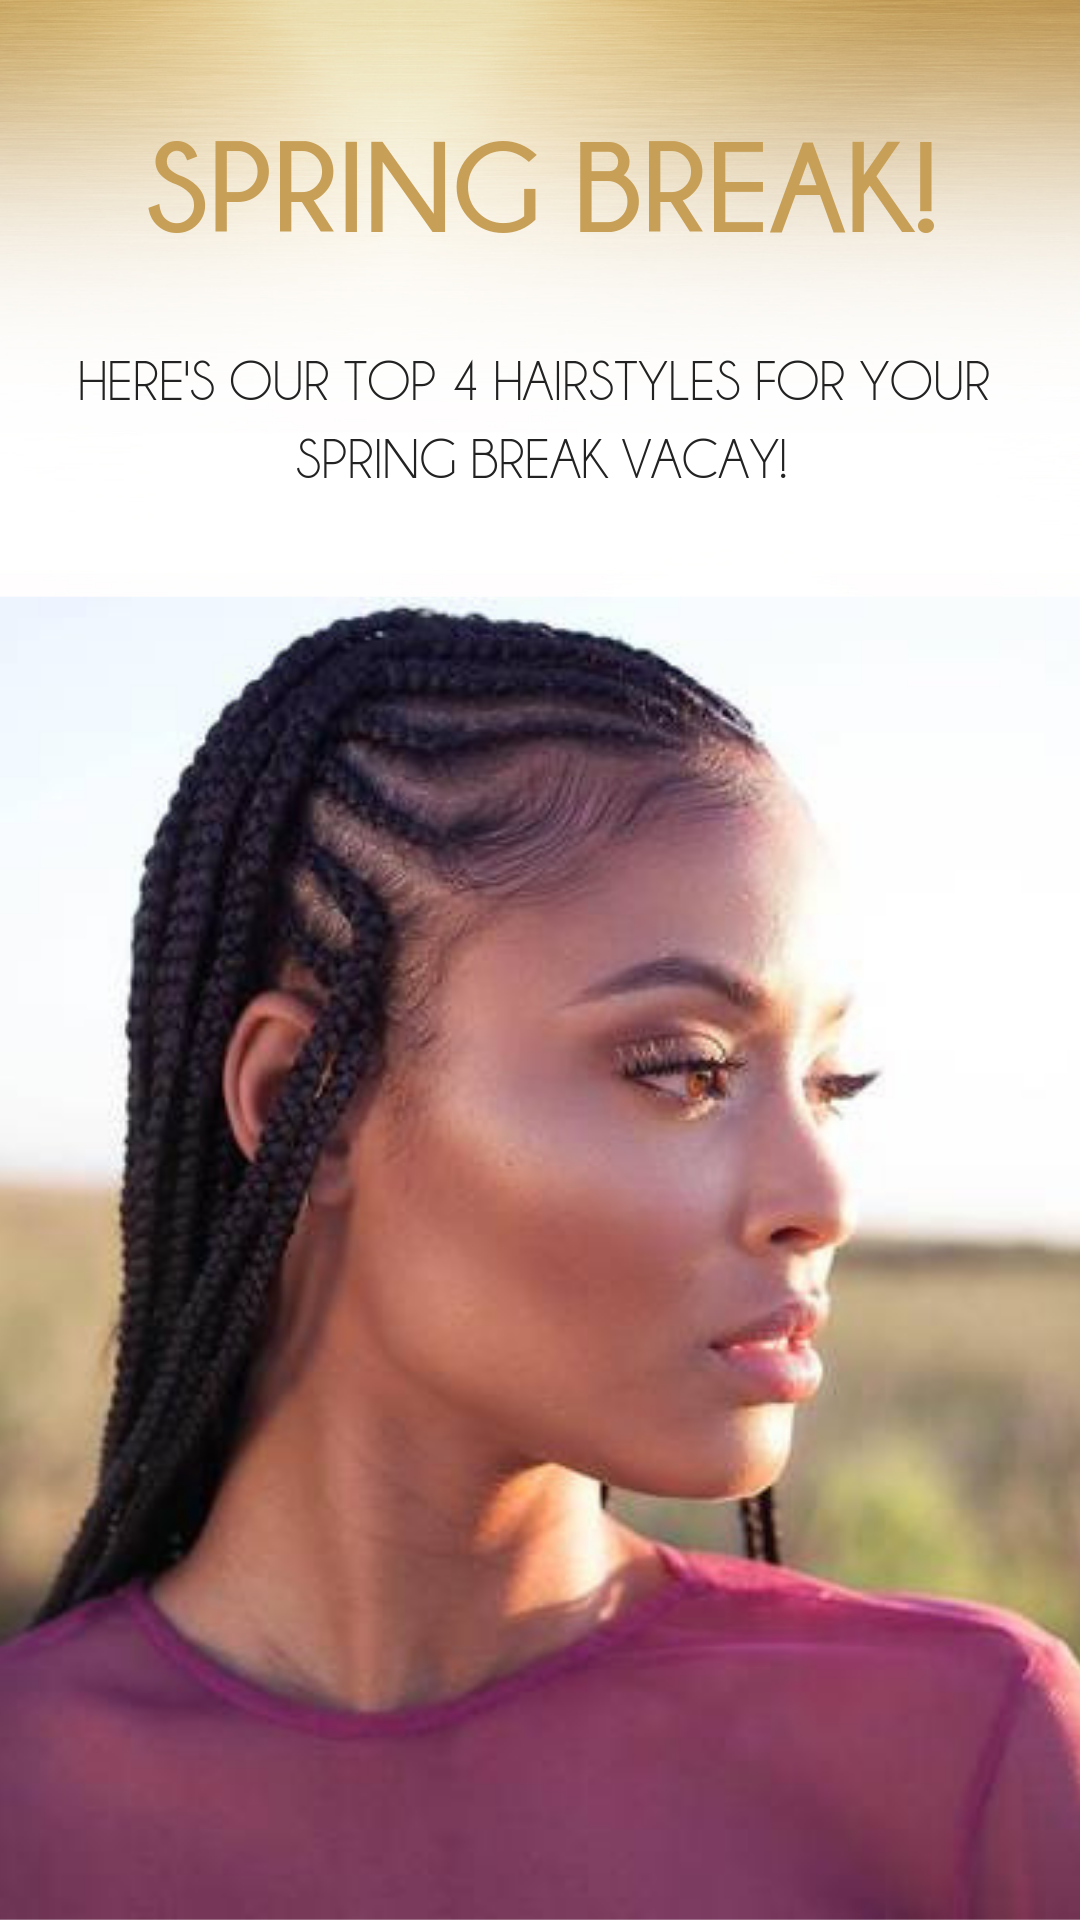 Four Hairstyles to Inspire Your Spring Break